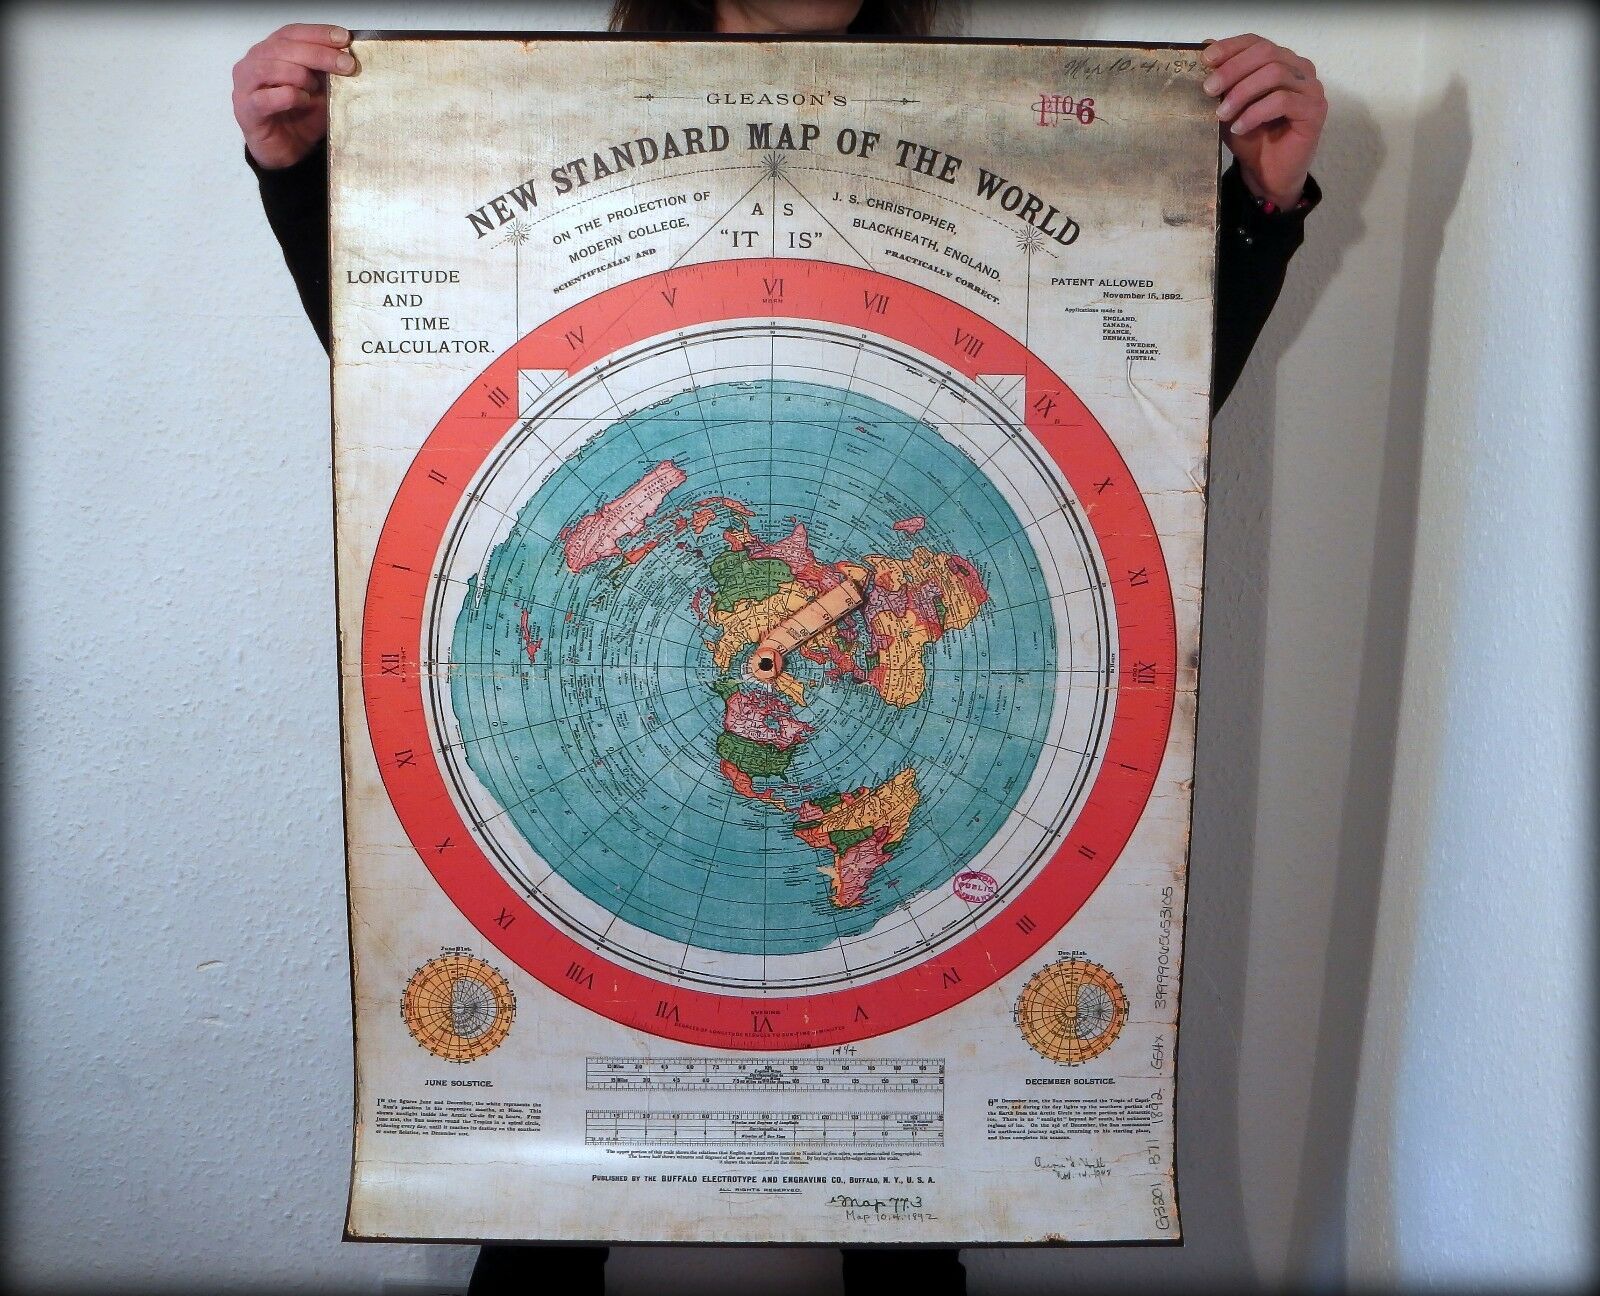 Gleason's New Standard Map Of The World 1892